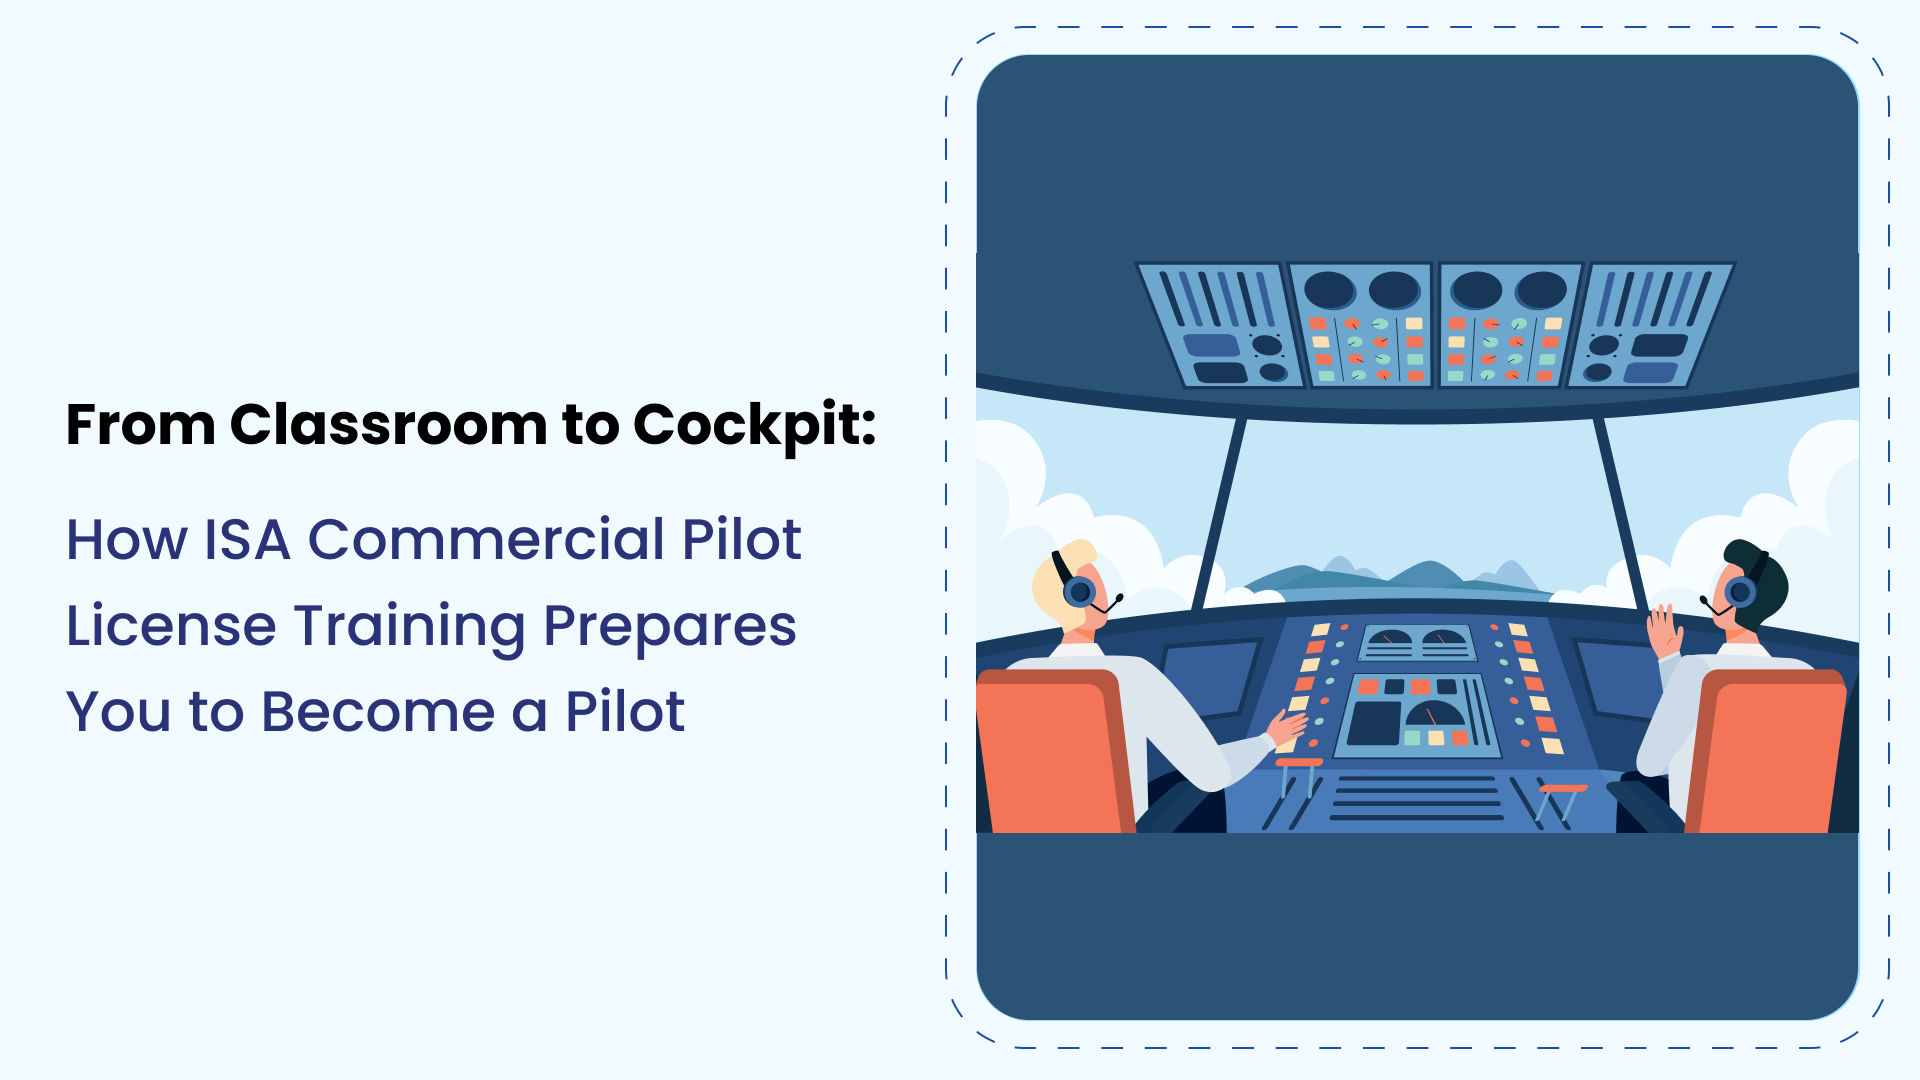 How ISA Commercial Pilot License Training Prepares You to Become a Pilot